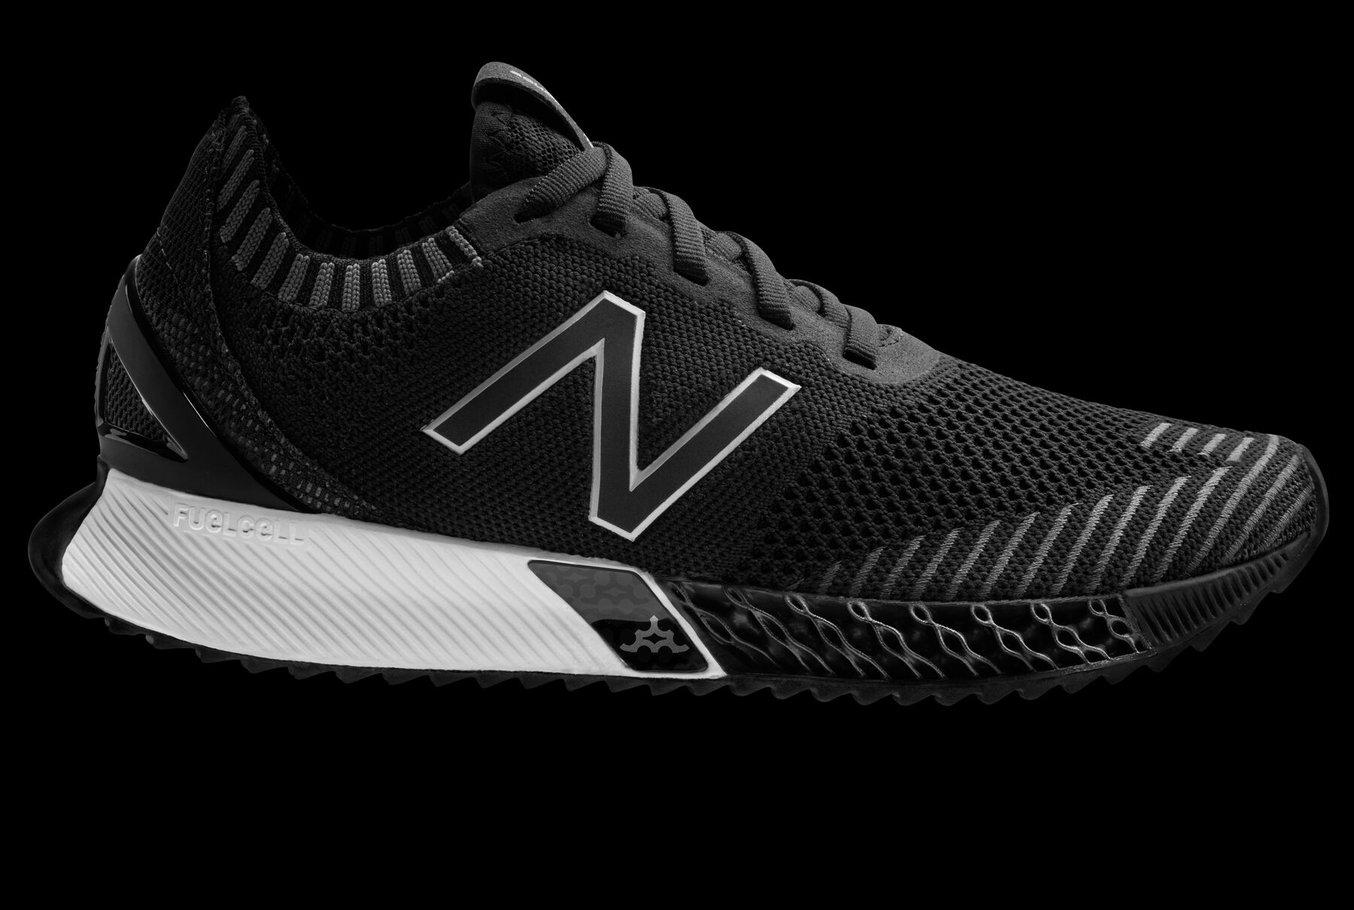 example of product innovation with 3D printing - new balance